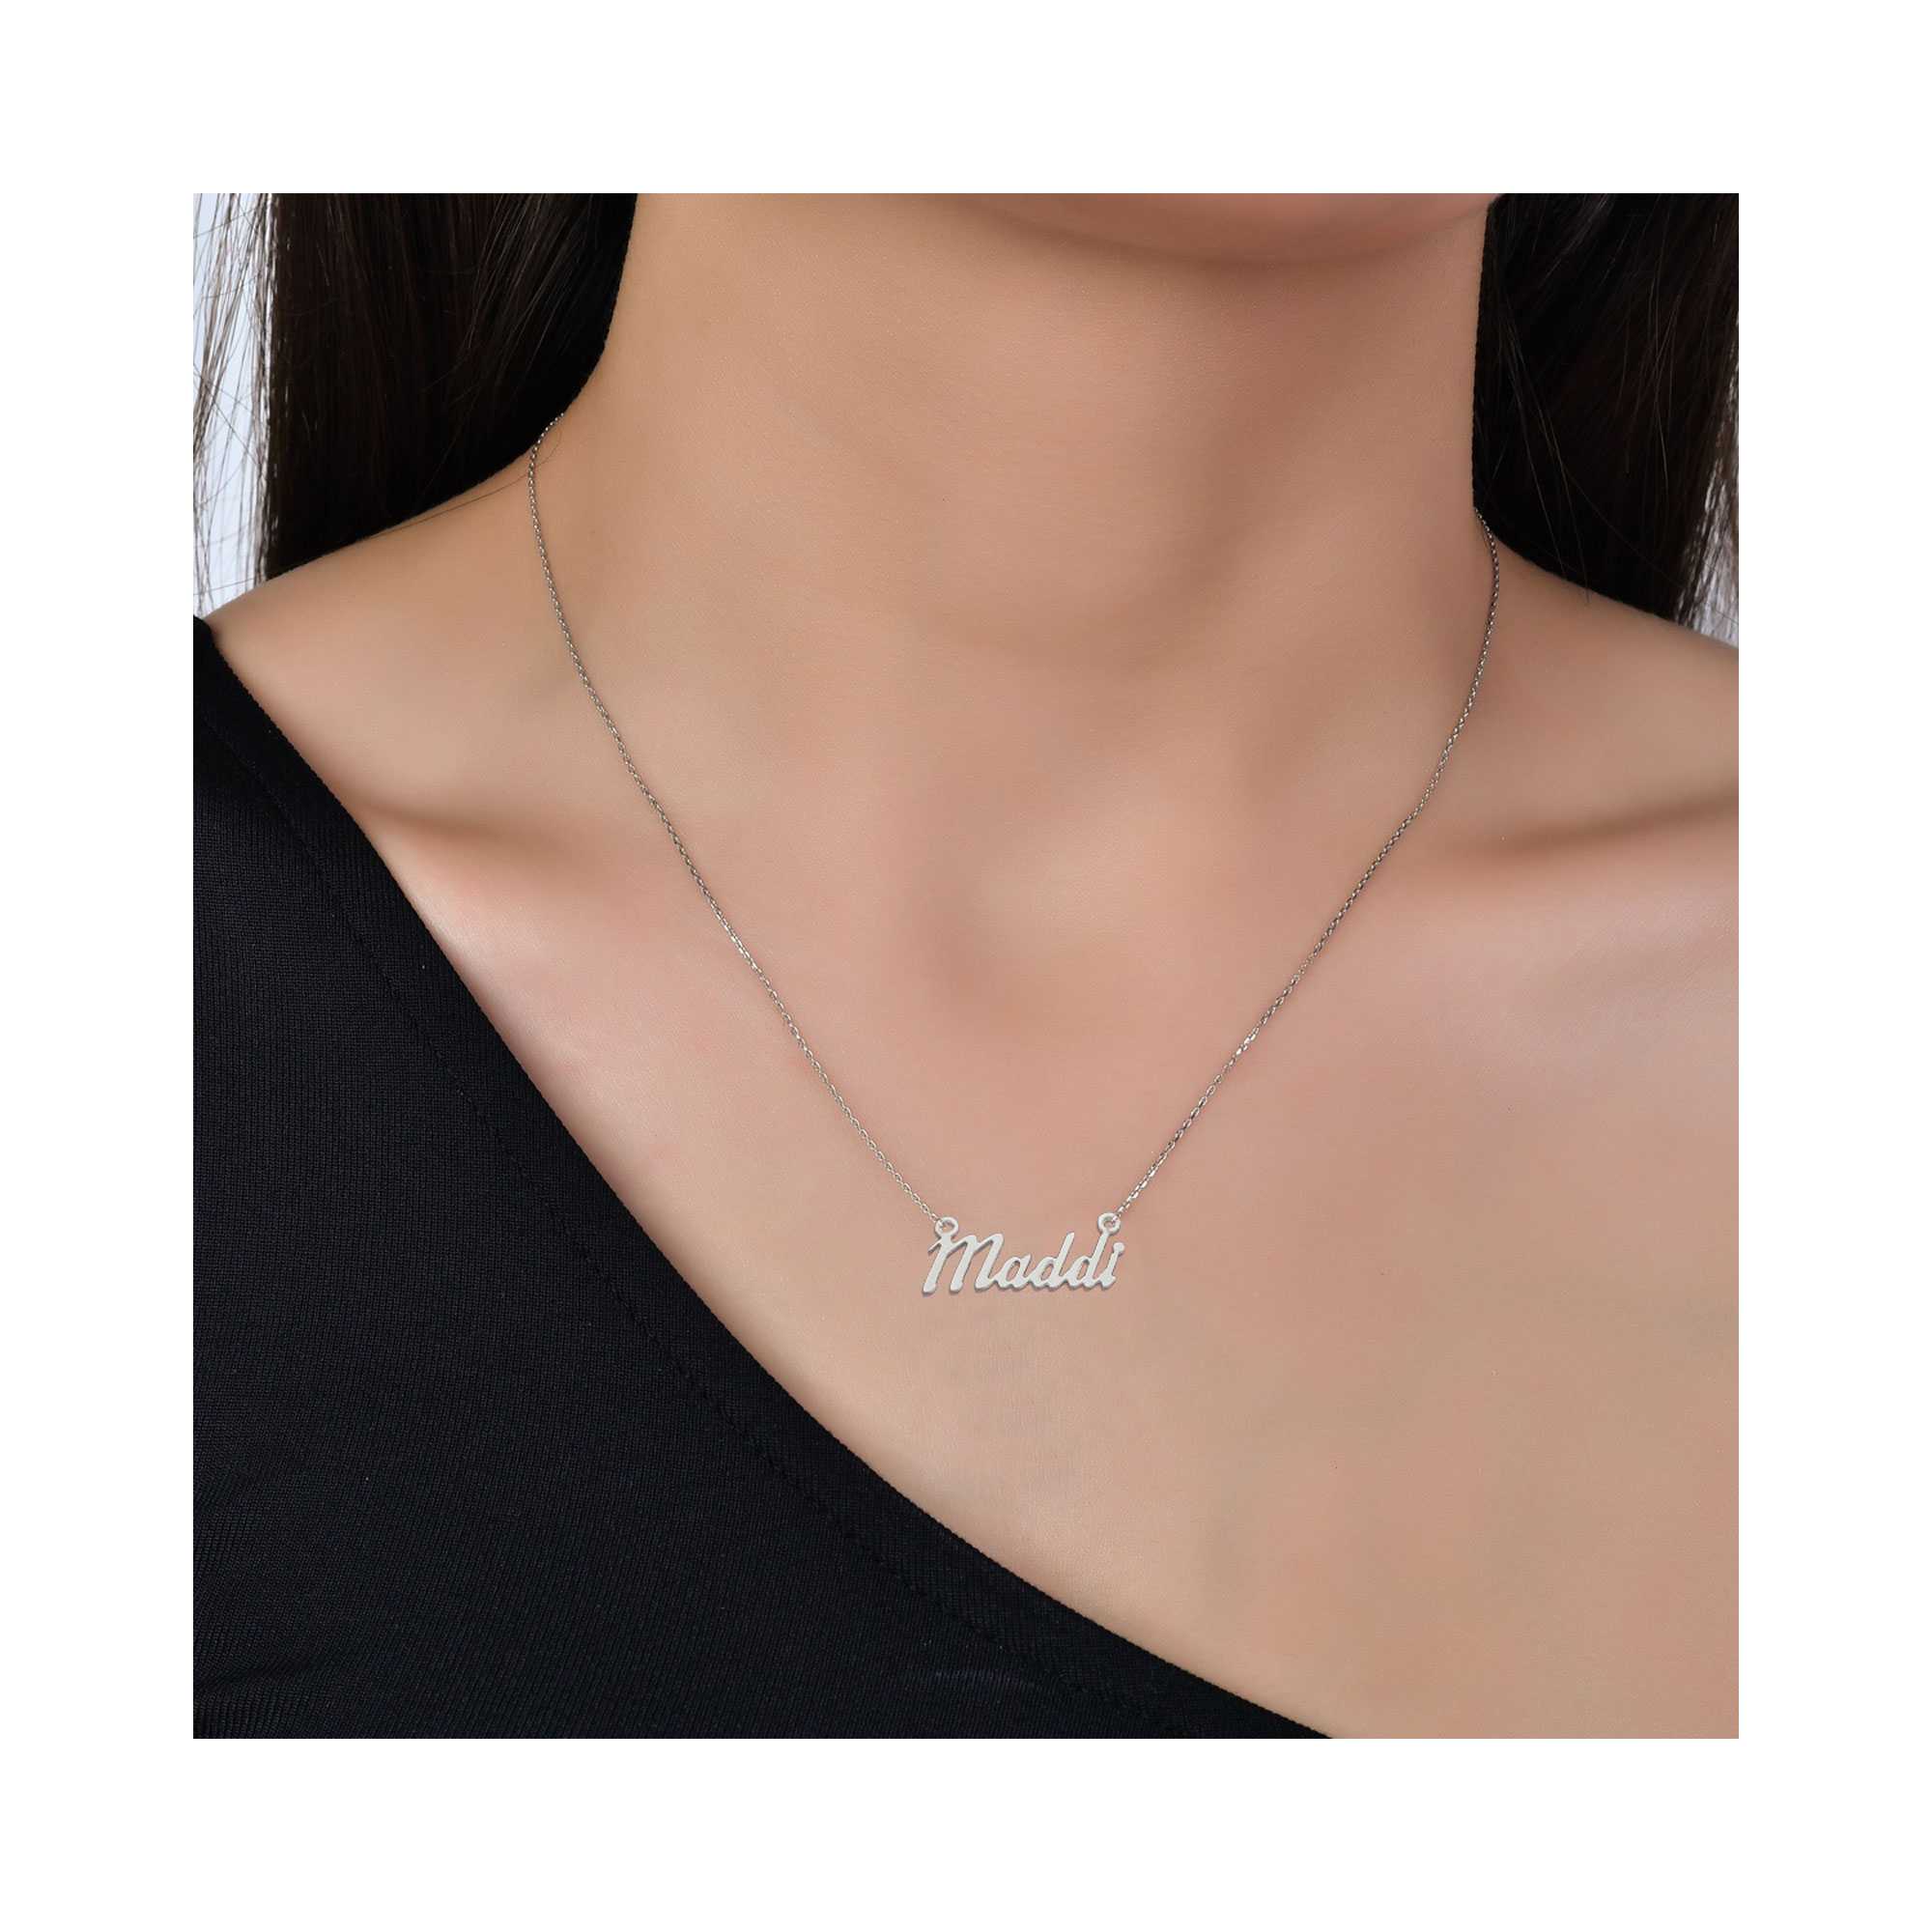 Personalized Name Necklace - | Mali's Canadian Fashionewelry 4 equal payments with Klarna
--------------------------------------